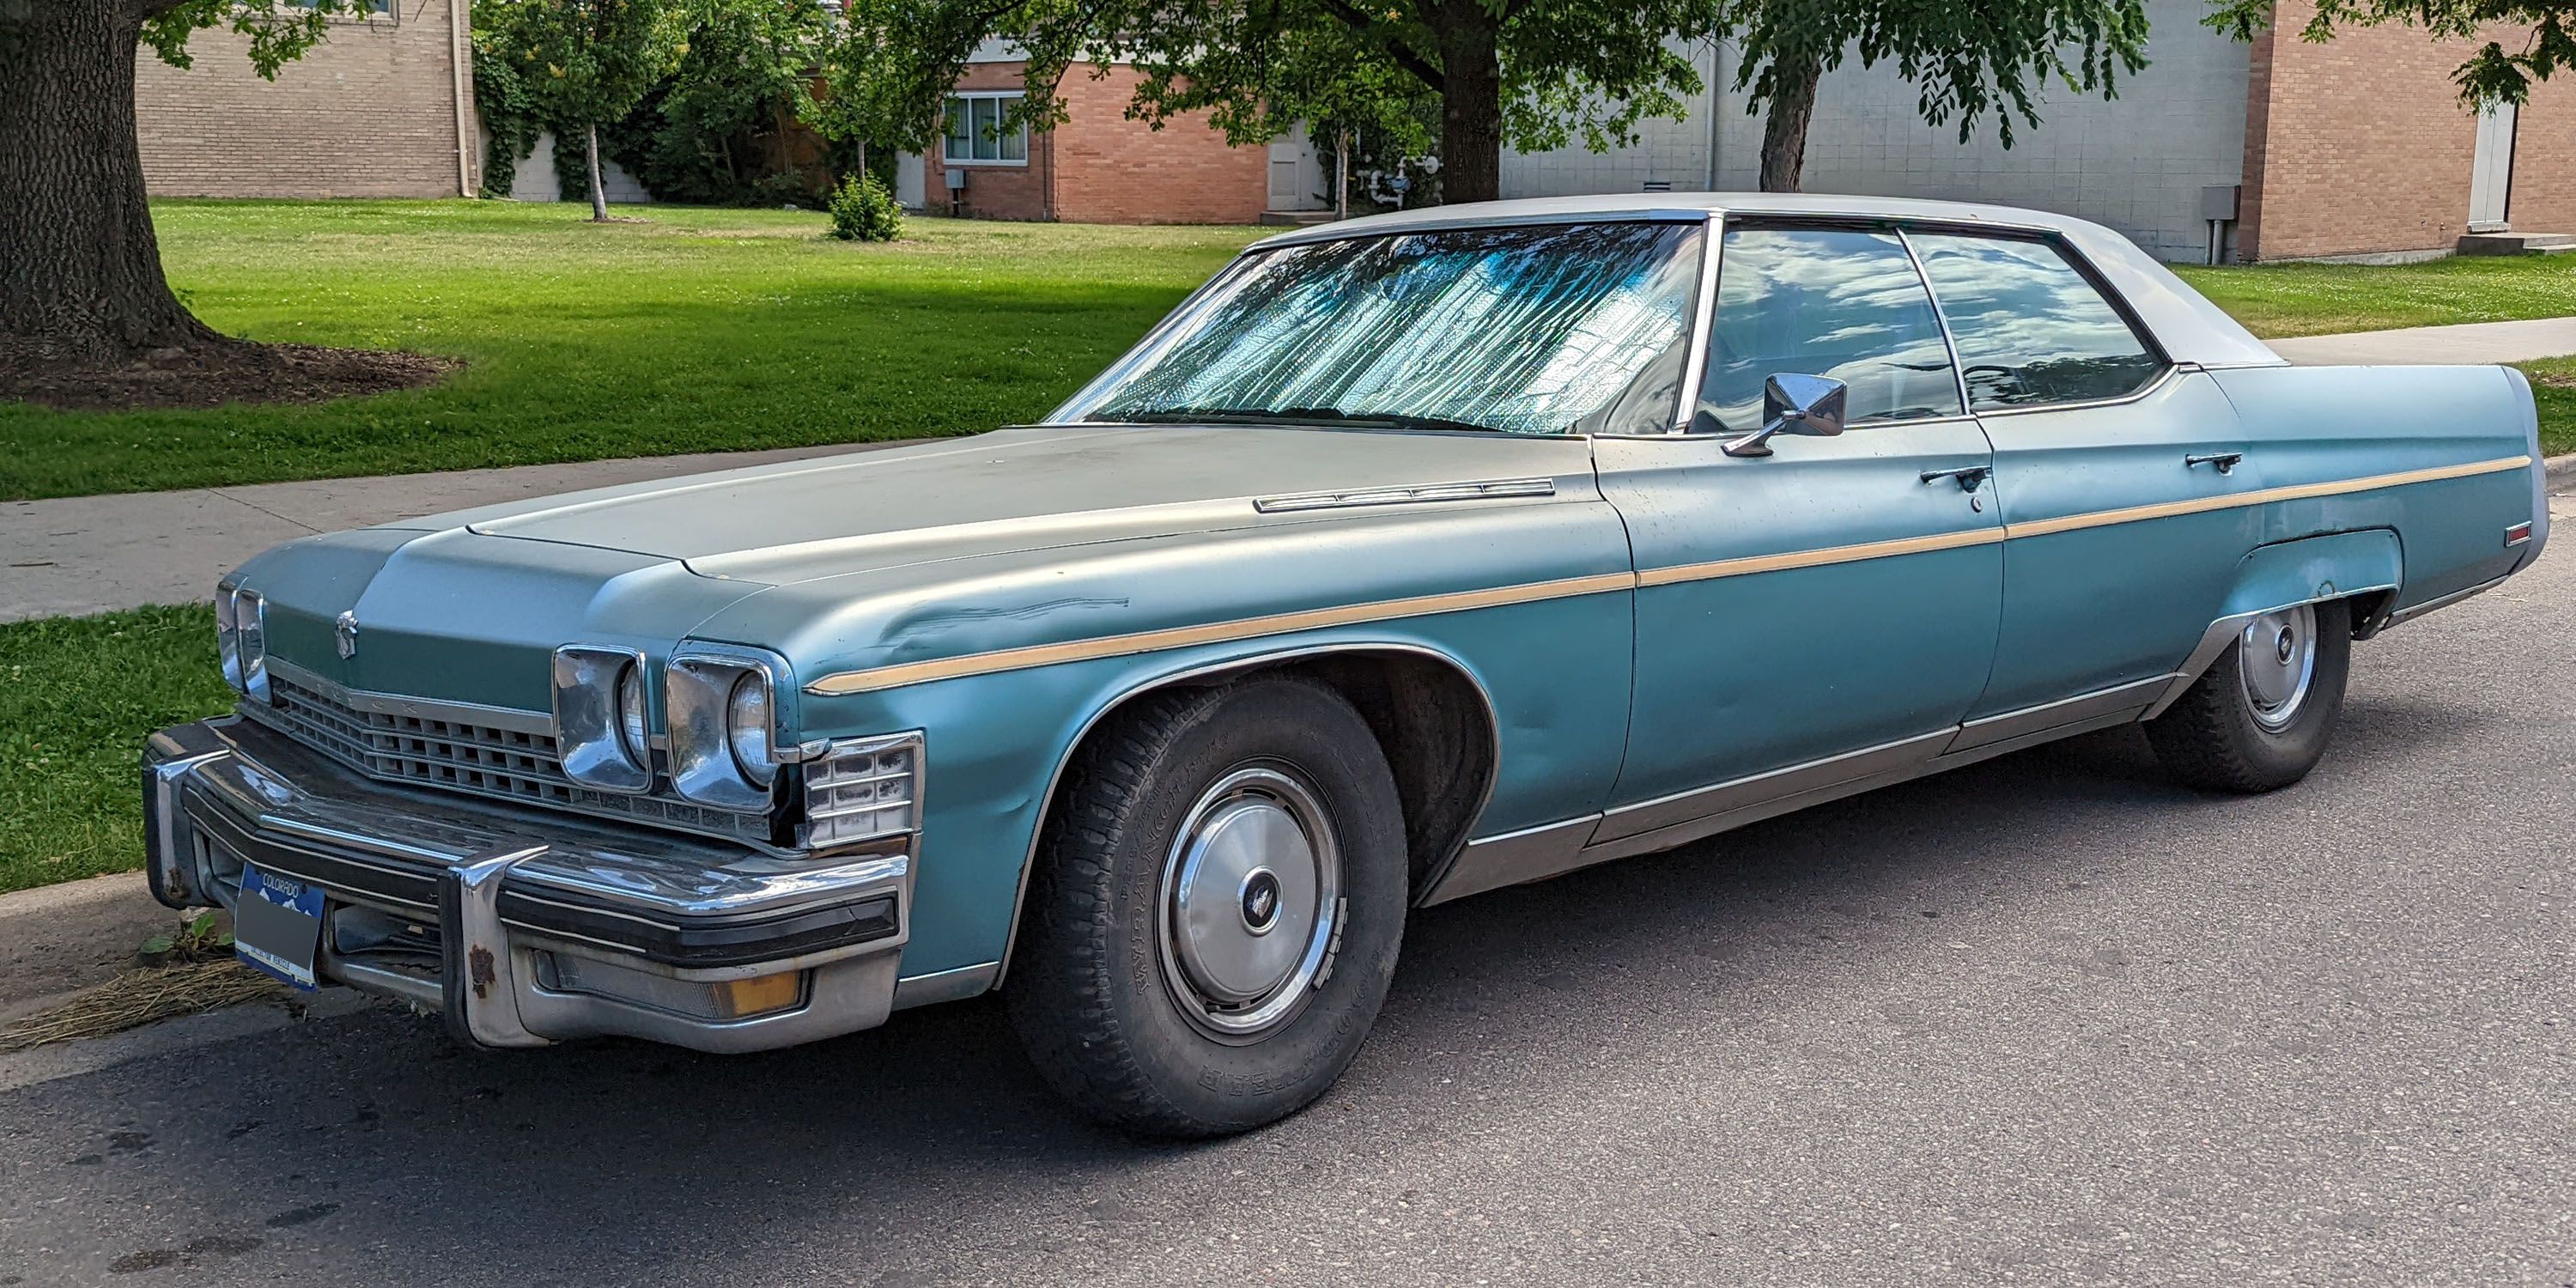 1974 Buick Electra Limited Sedan Is Down On the Denver Street